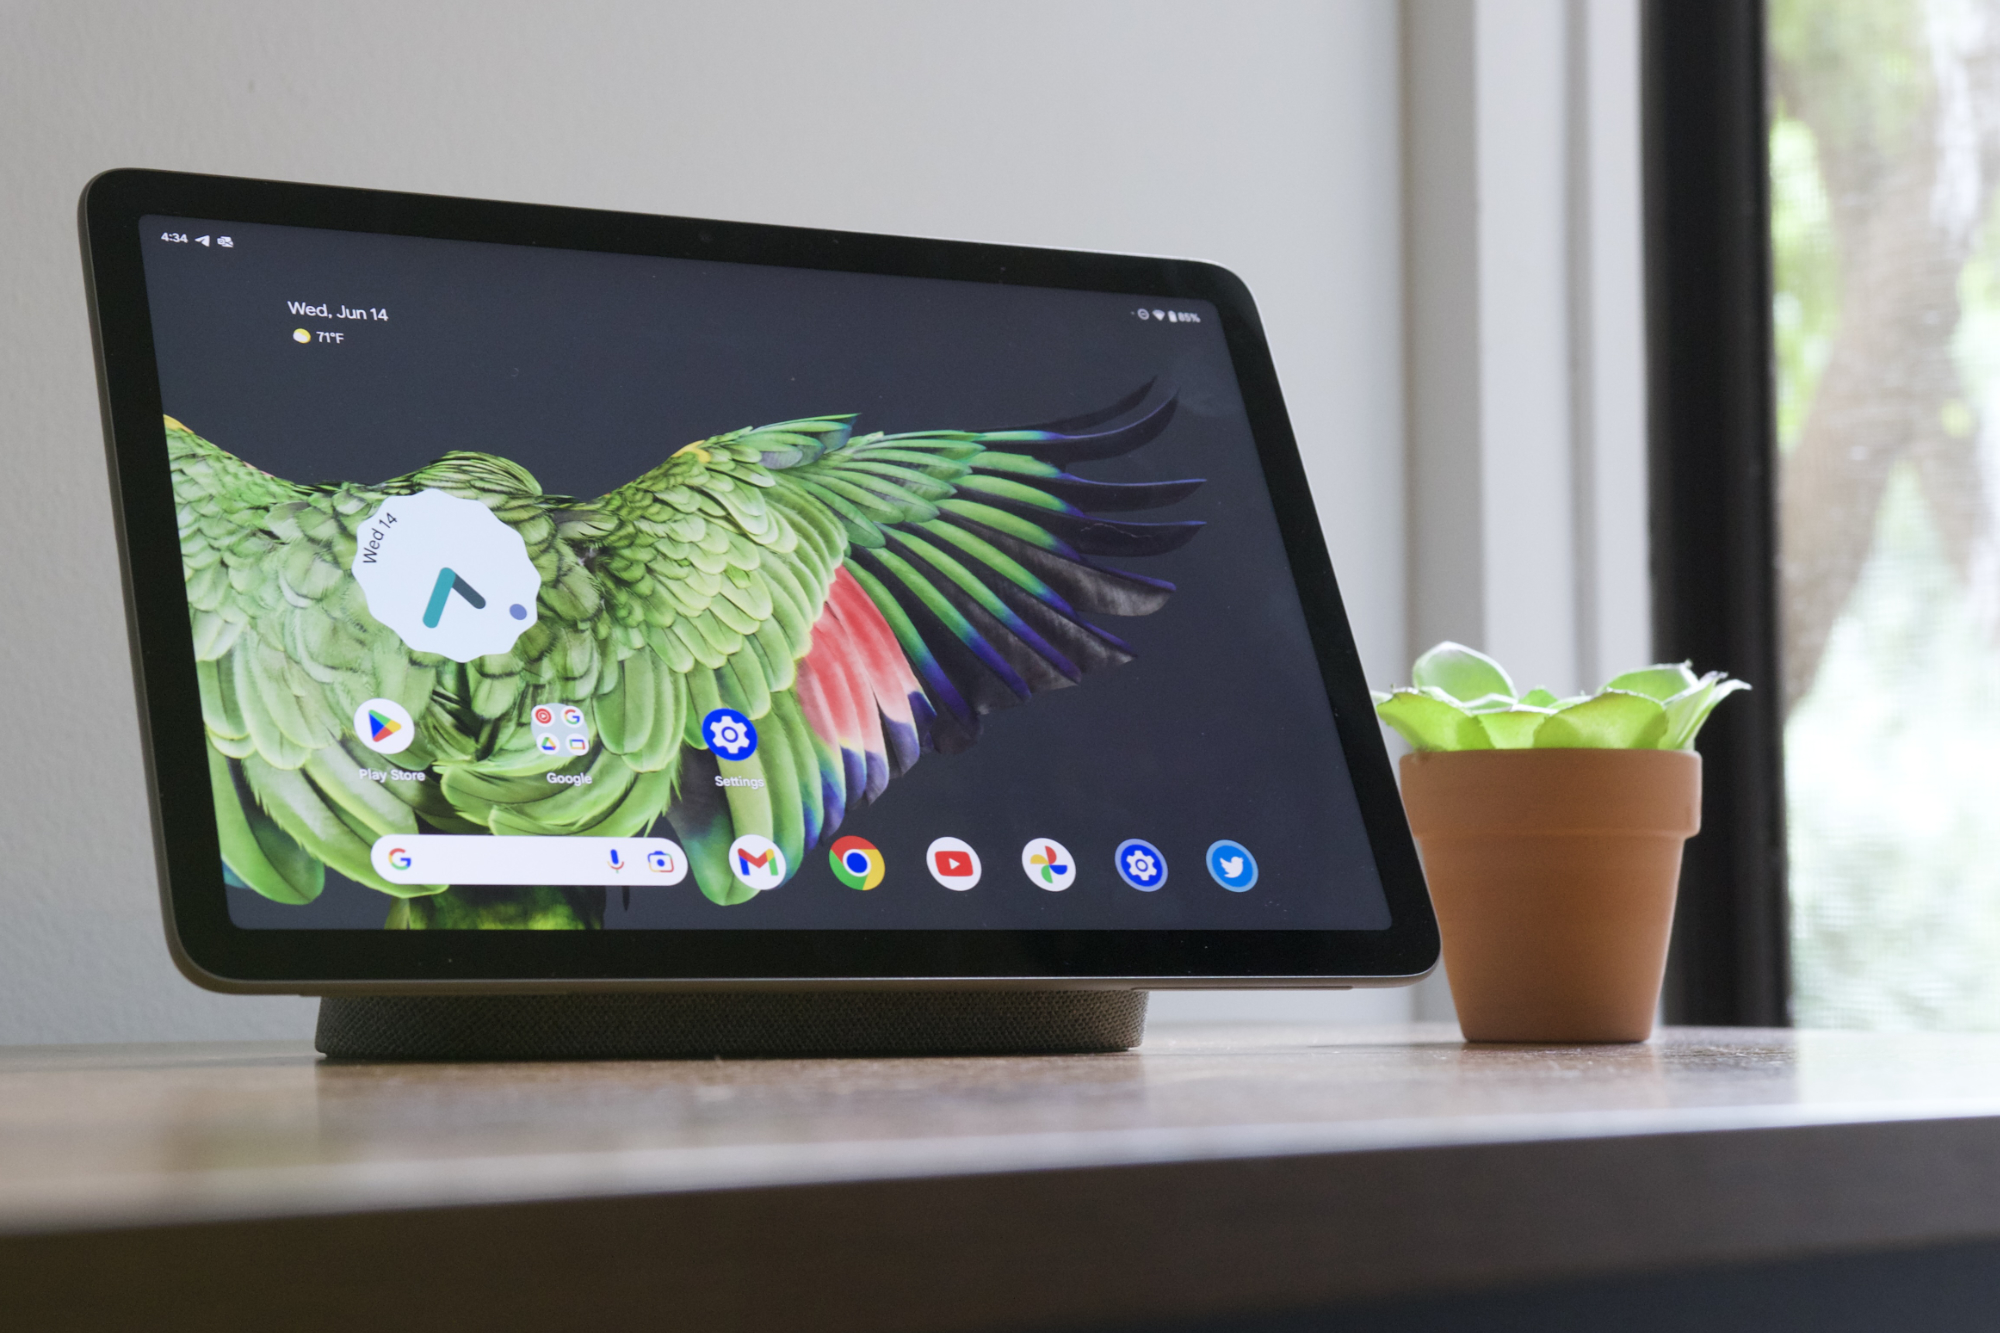 Google Pixel Tablet Reviews, Pros and Cons